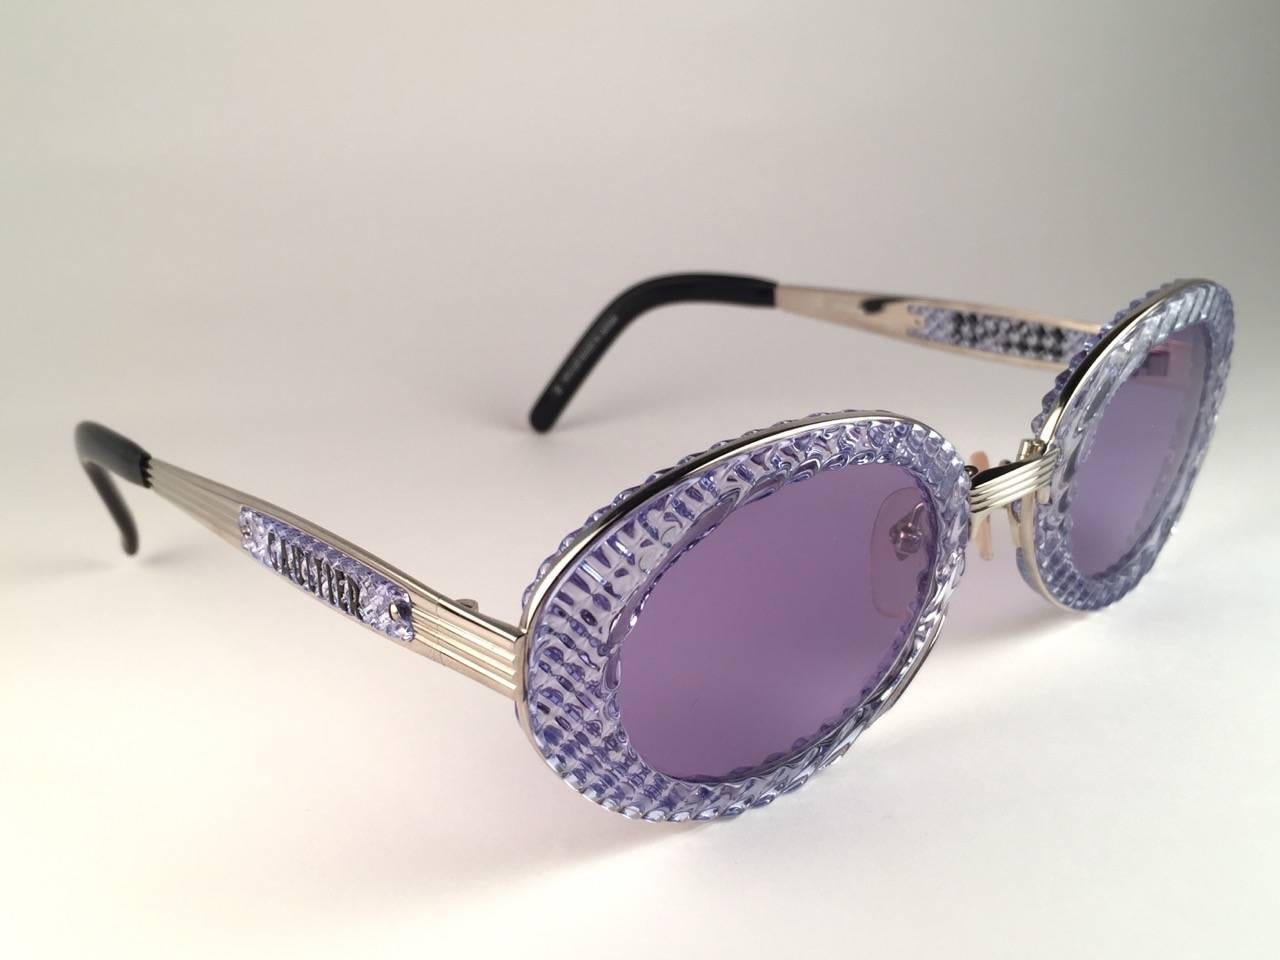 New Collectors Item!

New Jean Paul Gaultier 56 5201 Oval Blue Translucent frame with itemized details on the temples. 
Baby Blue lenses that complete a ready to wear JPG look.

Amazing design with strong yet intricate details.
Design and produced